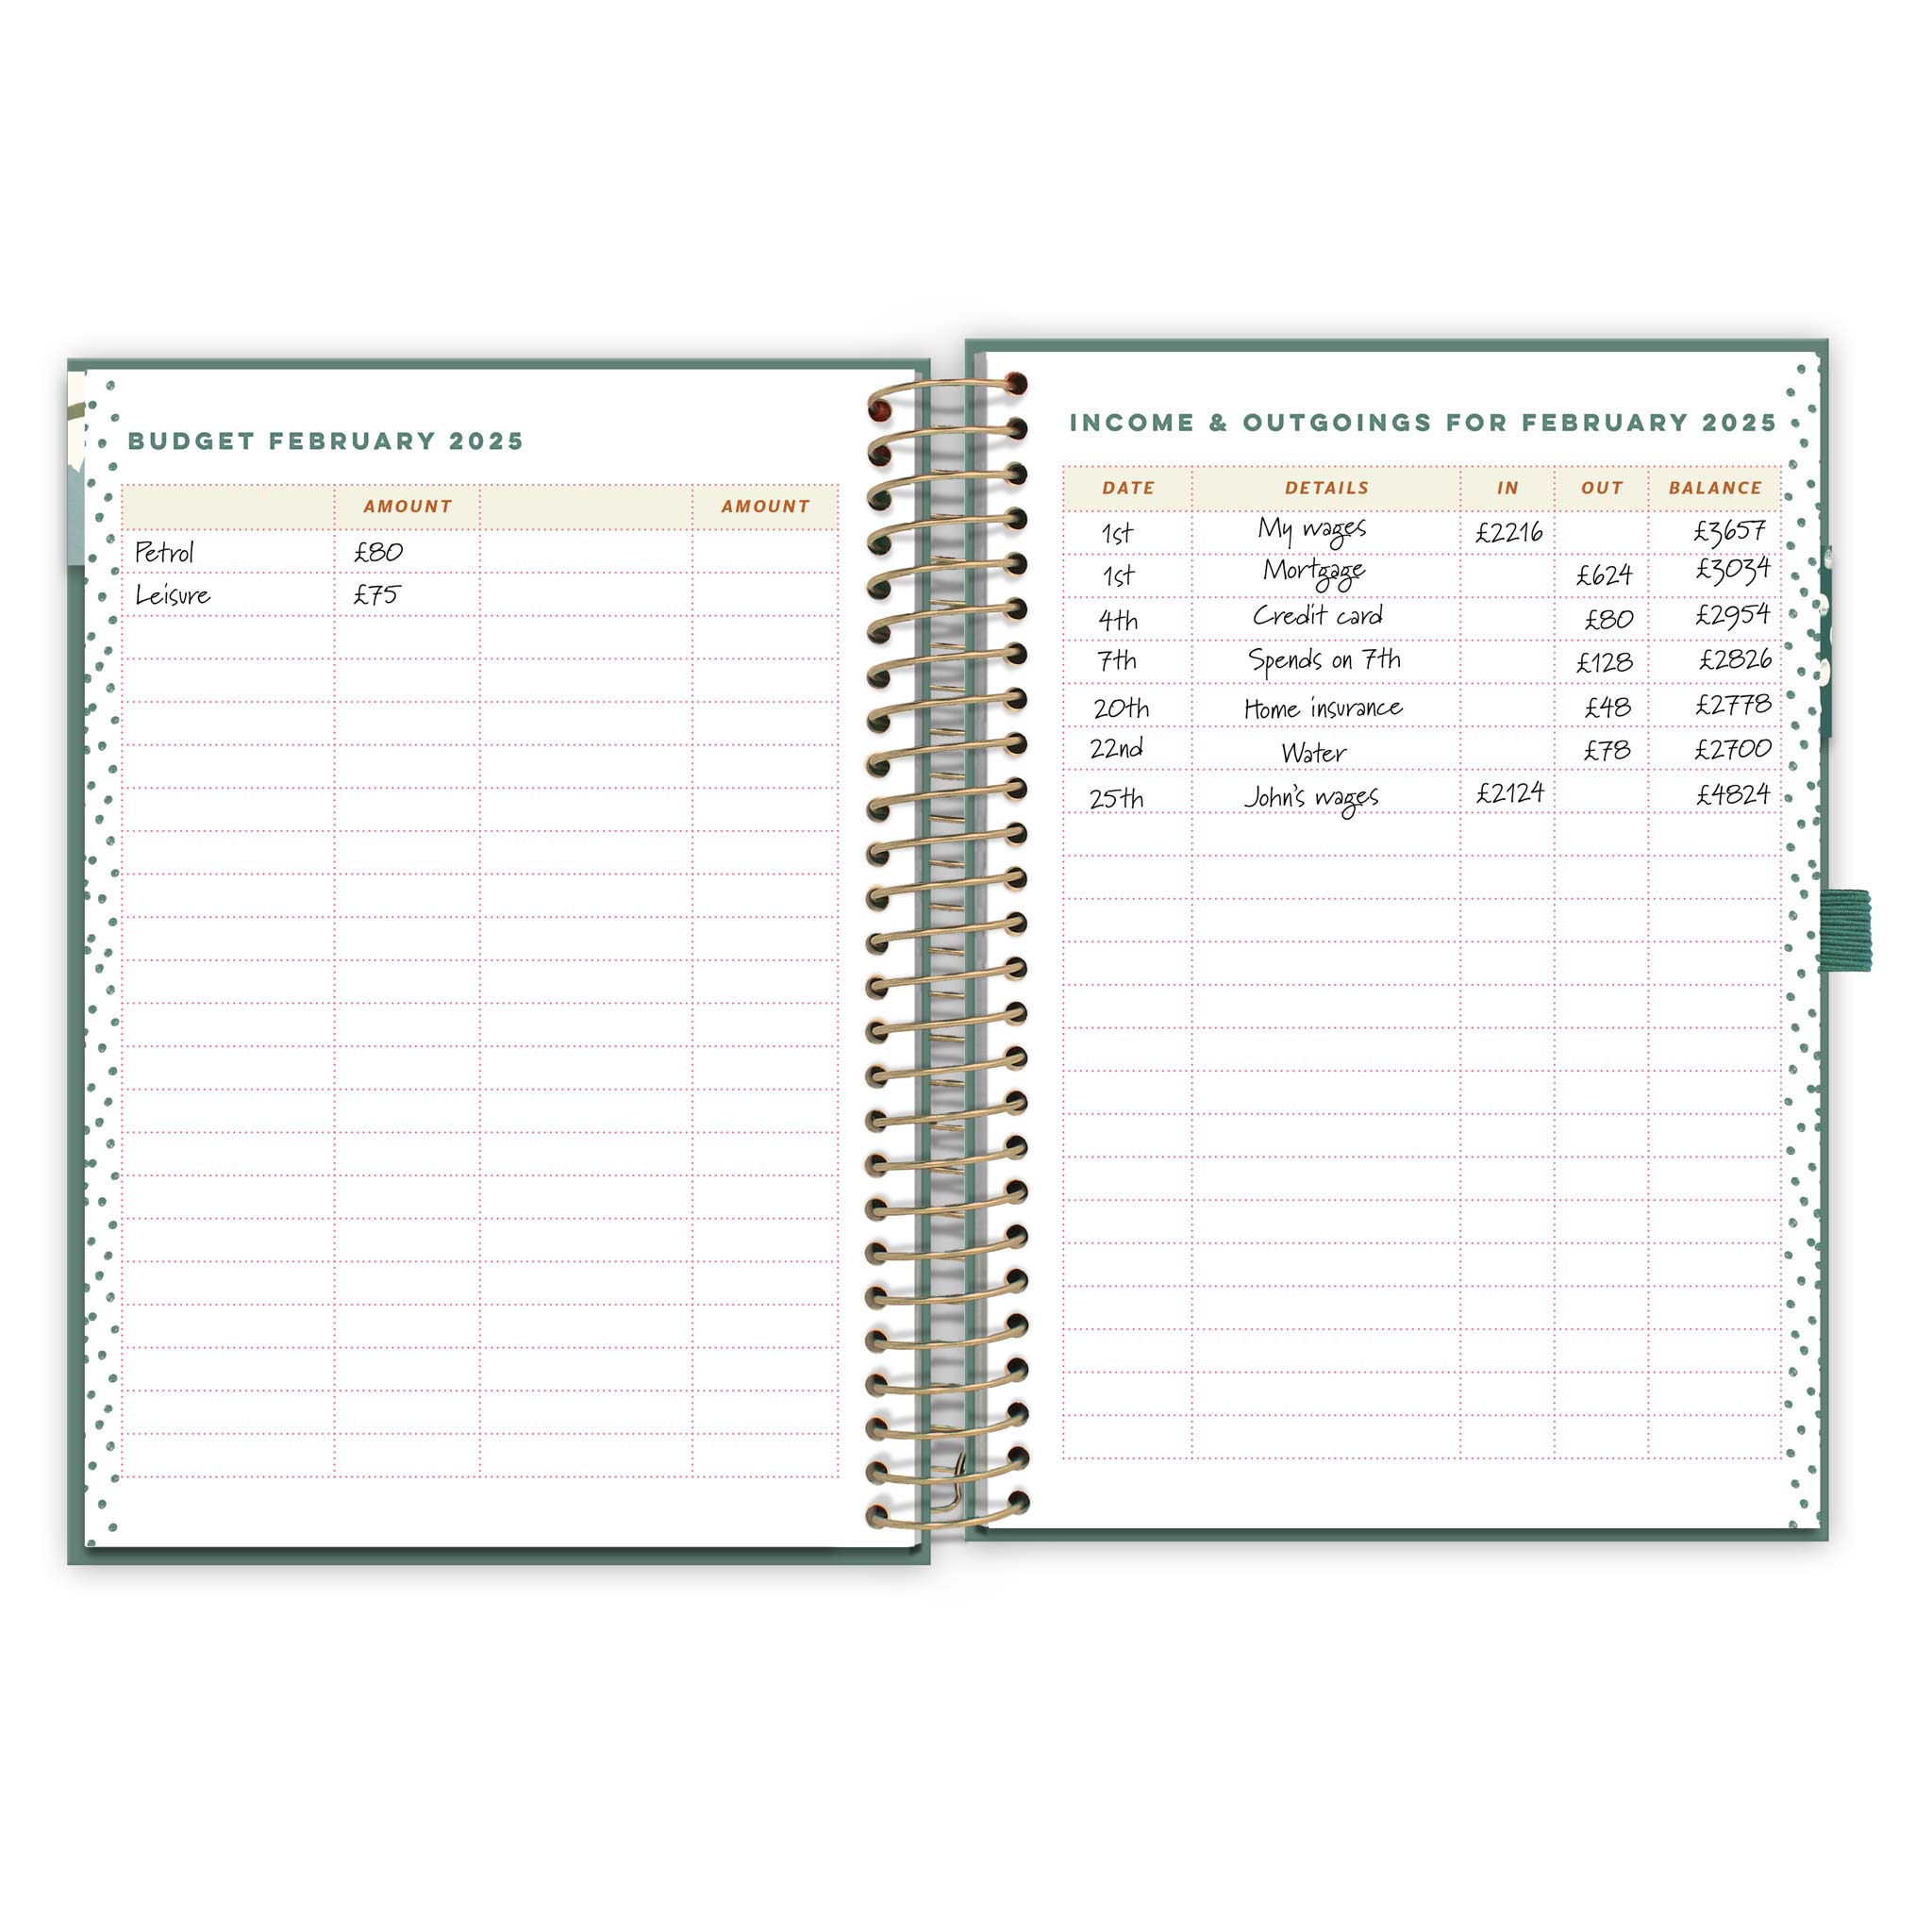 An open diary spread with a budget page for February 2025 and an income and outgoings page.